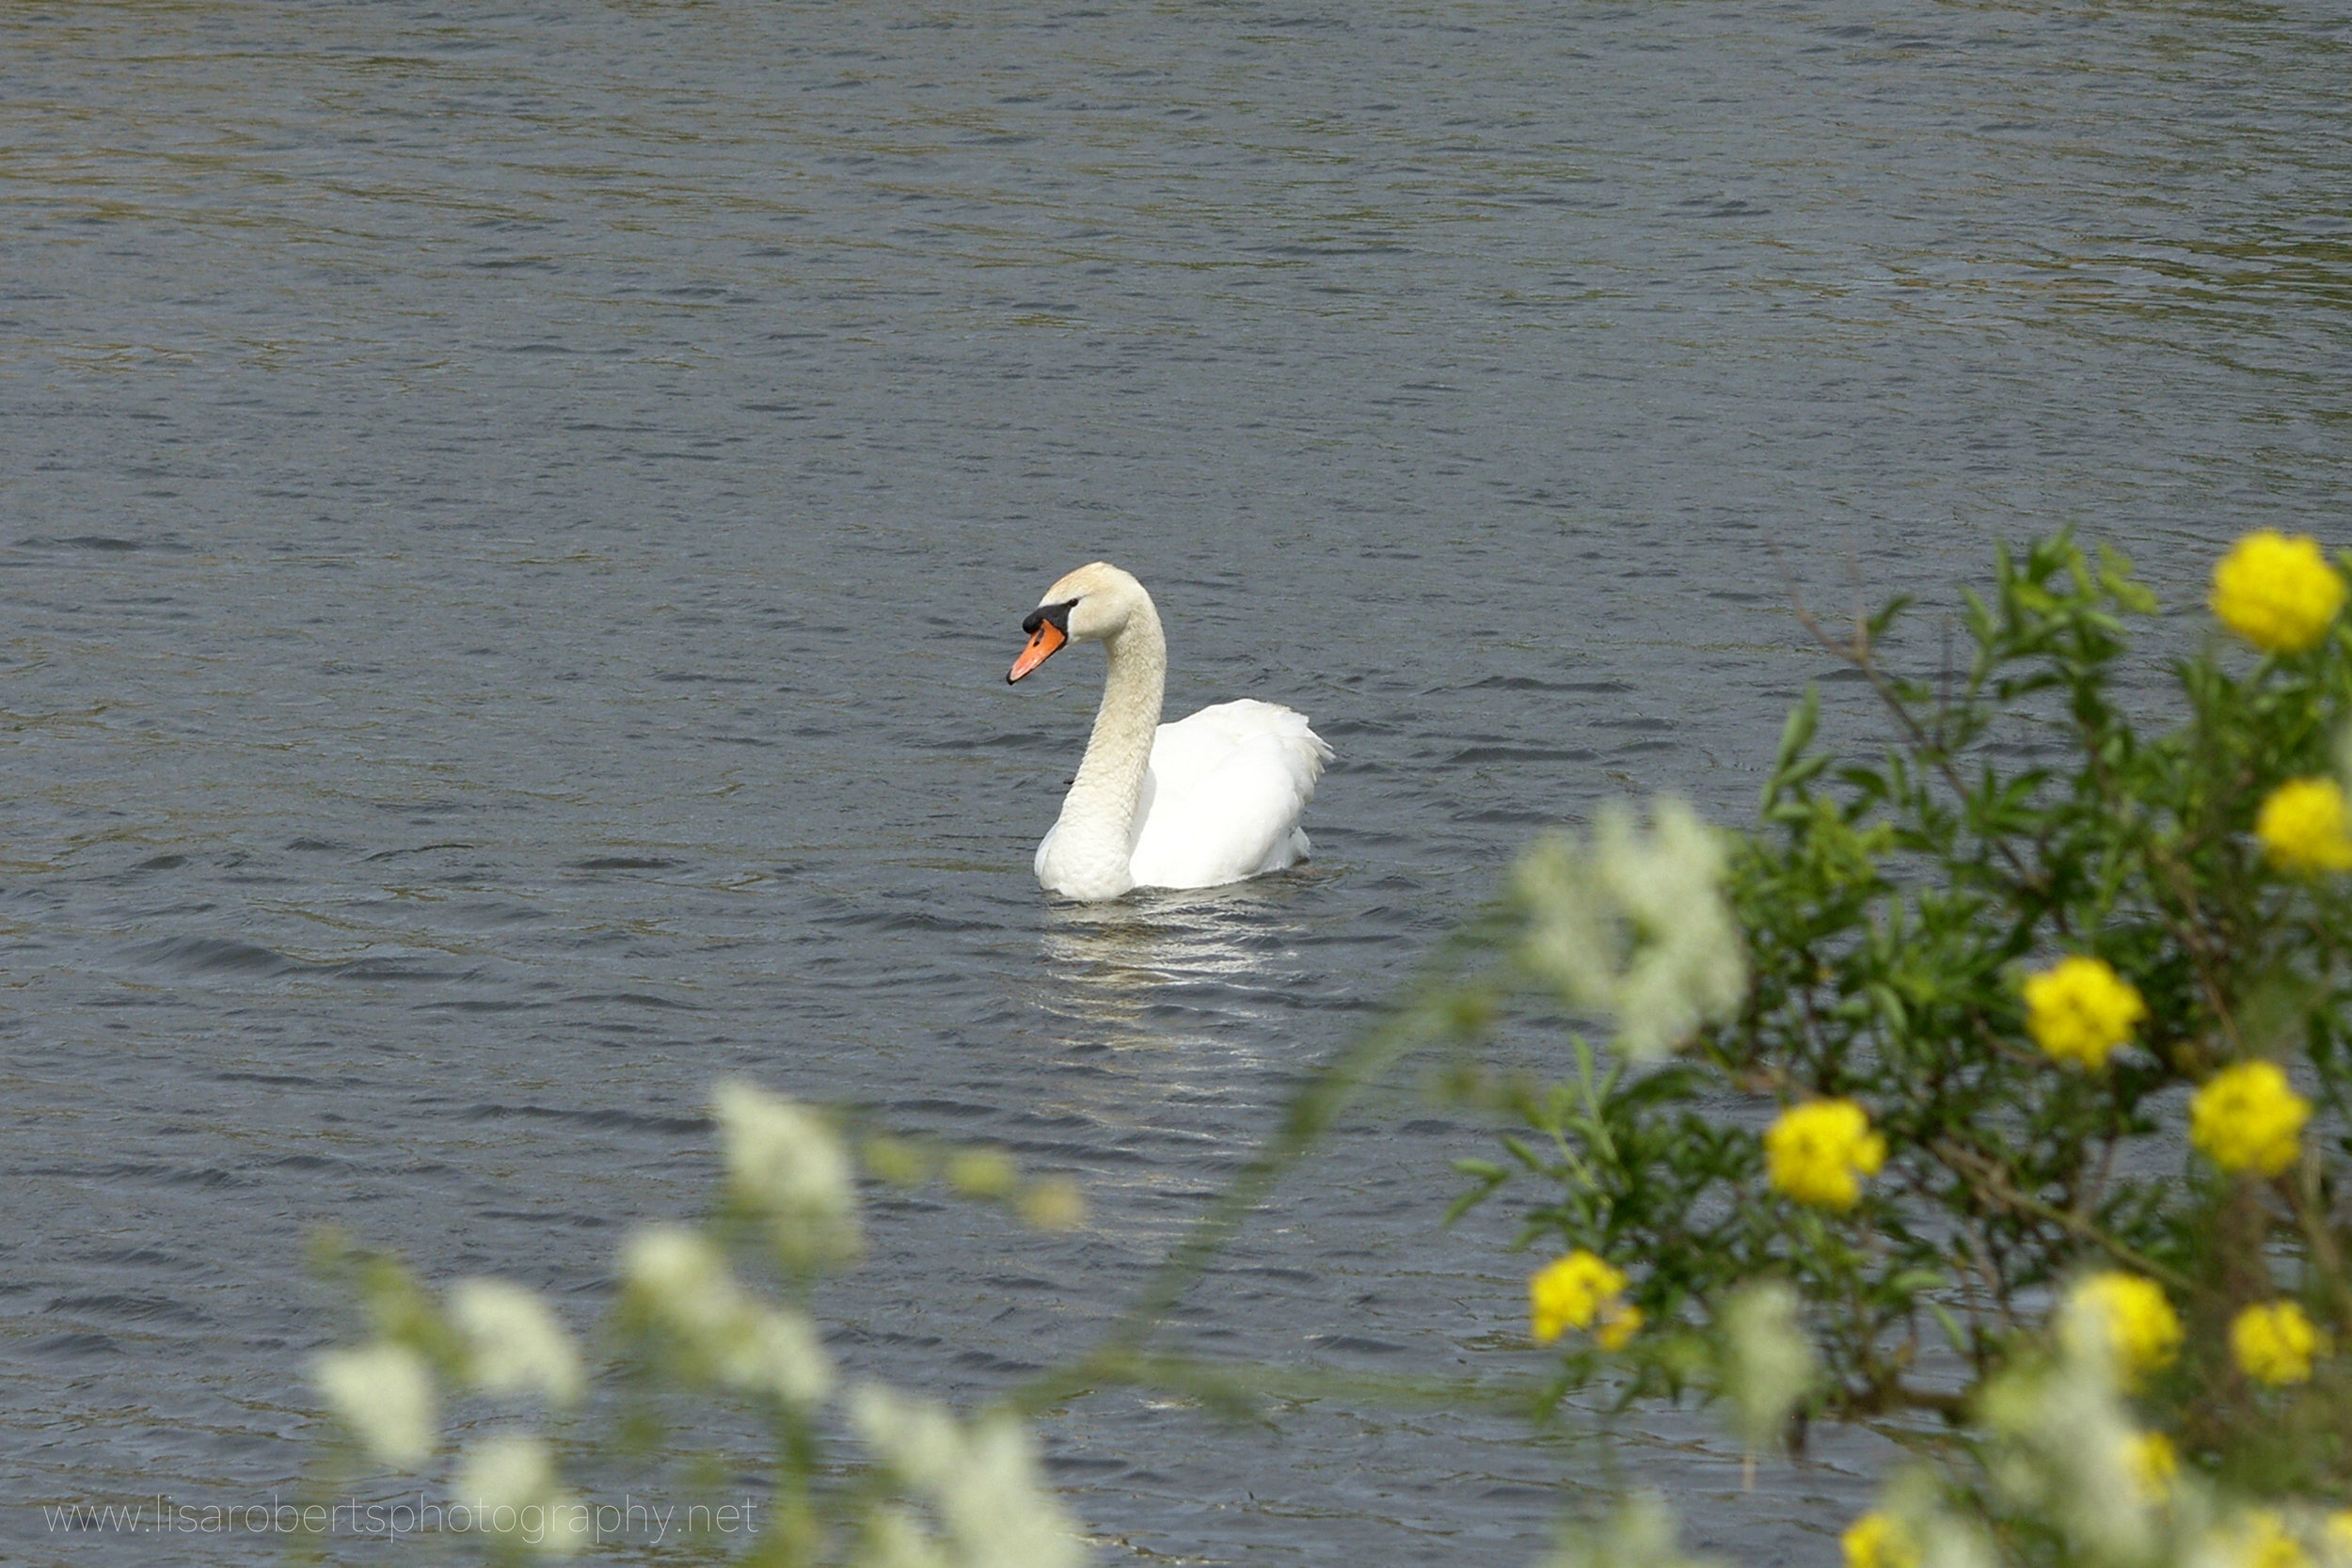  Swan on the River Severn 